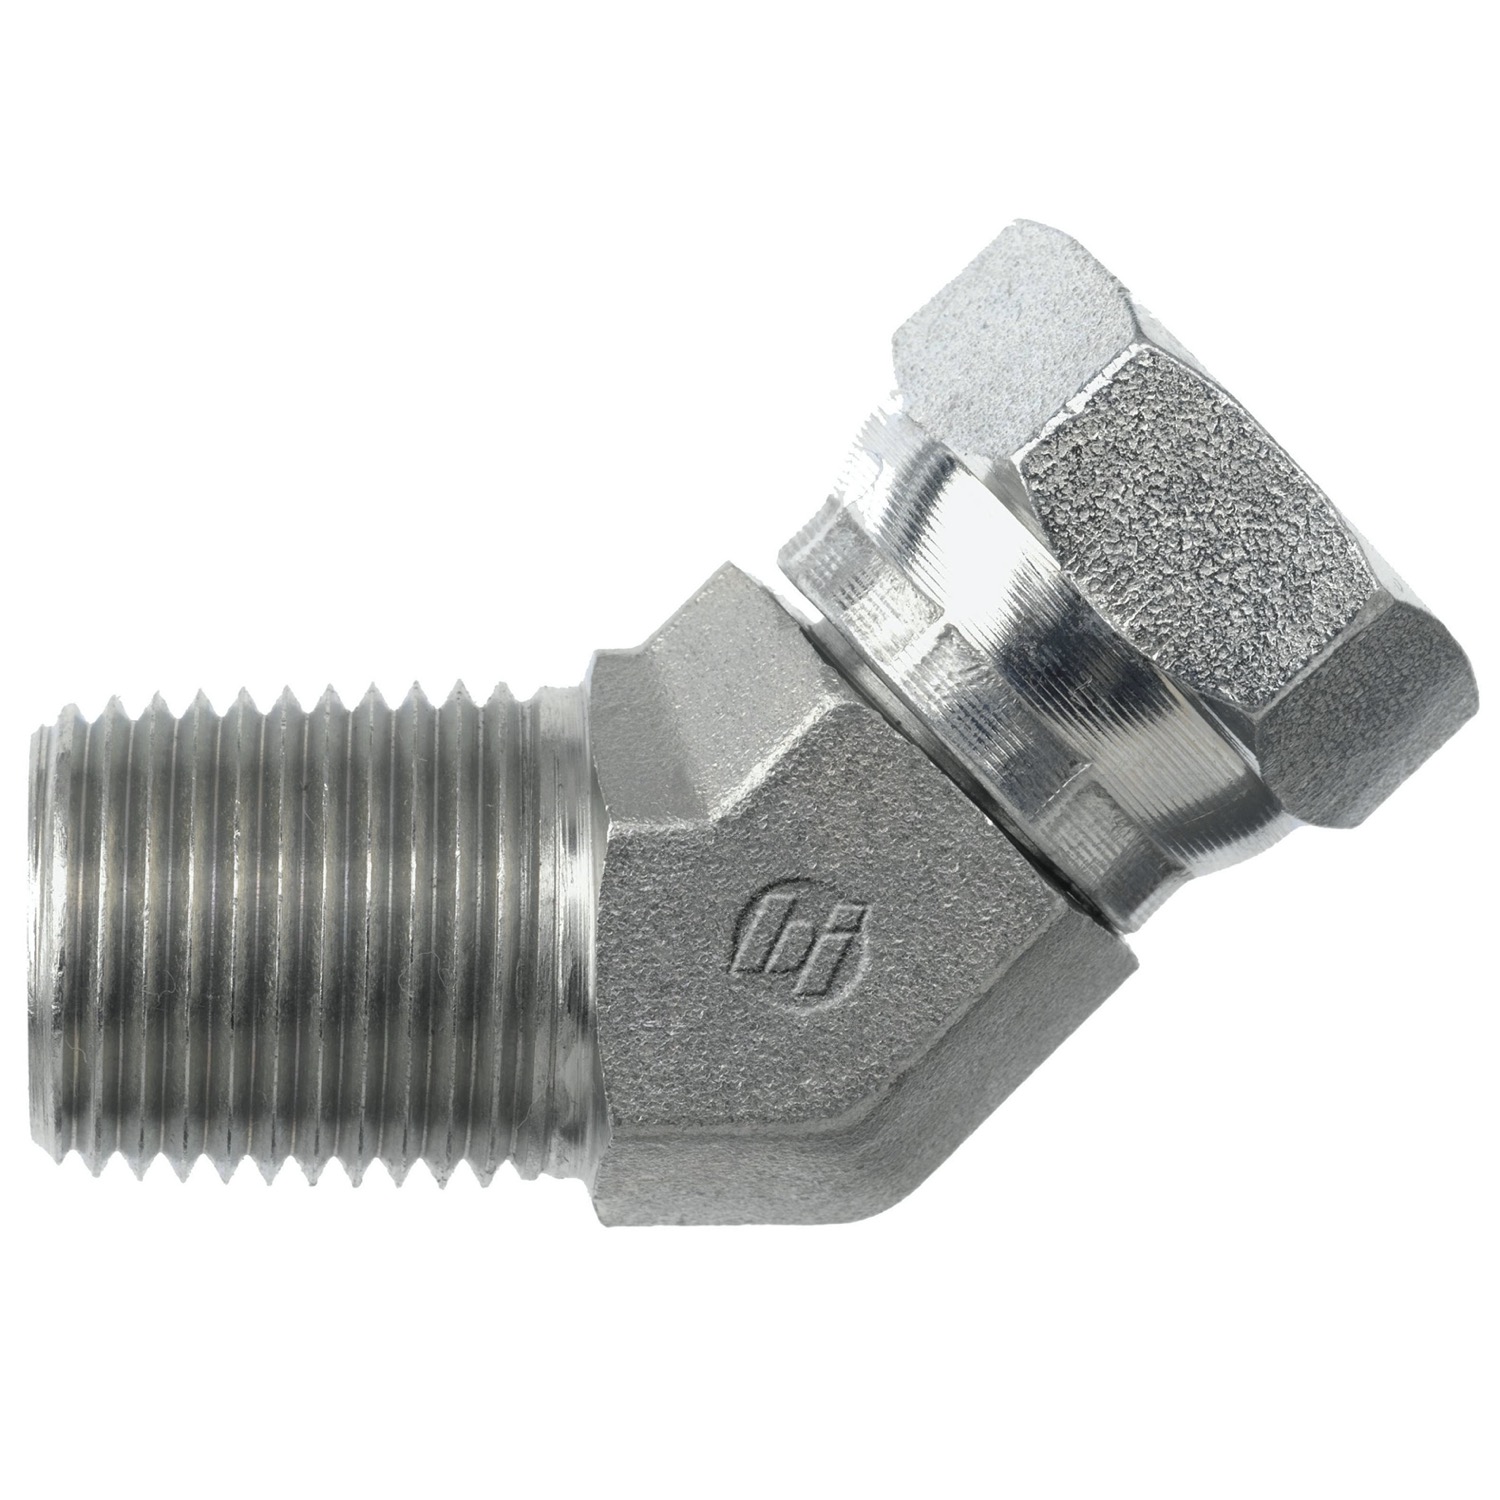 Hydraulic Hose Adapters - Elbow 45° Fitting, NPTF to NPSM, 1503 Series